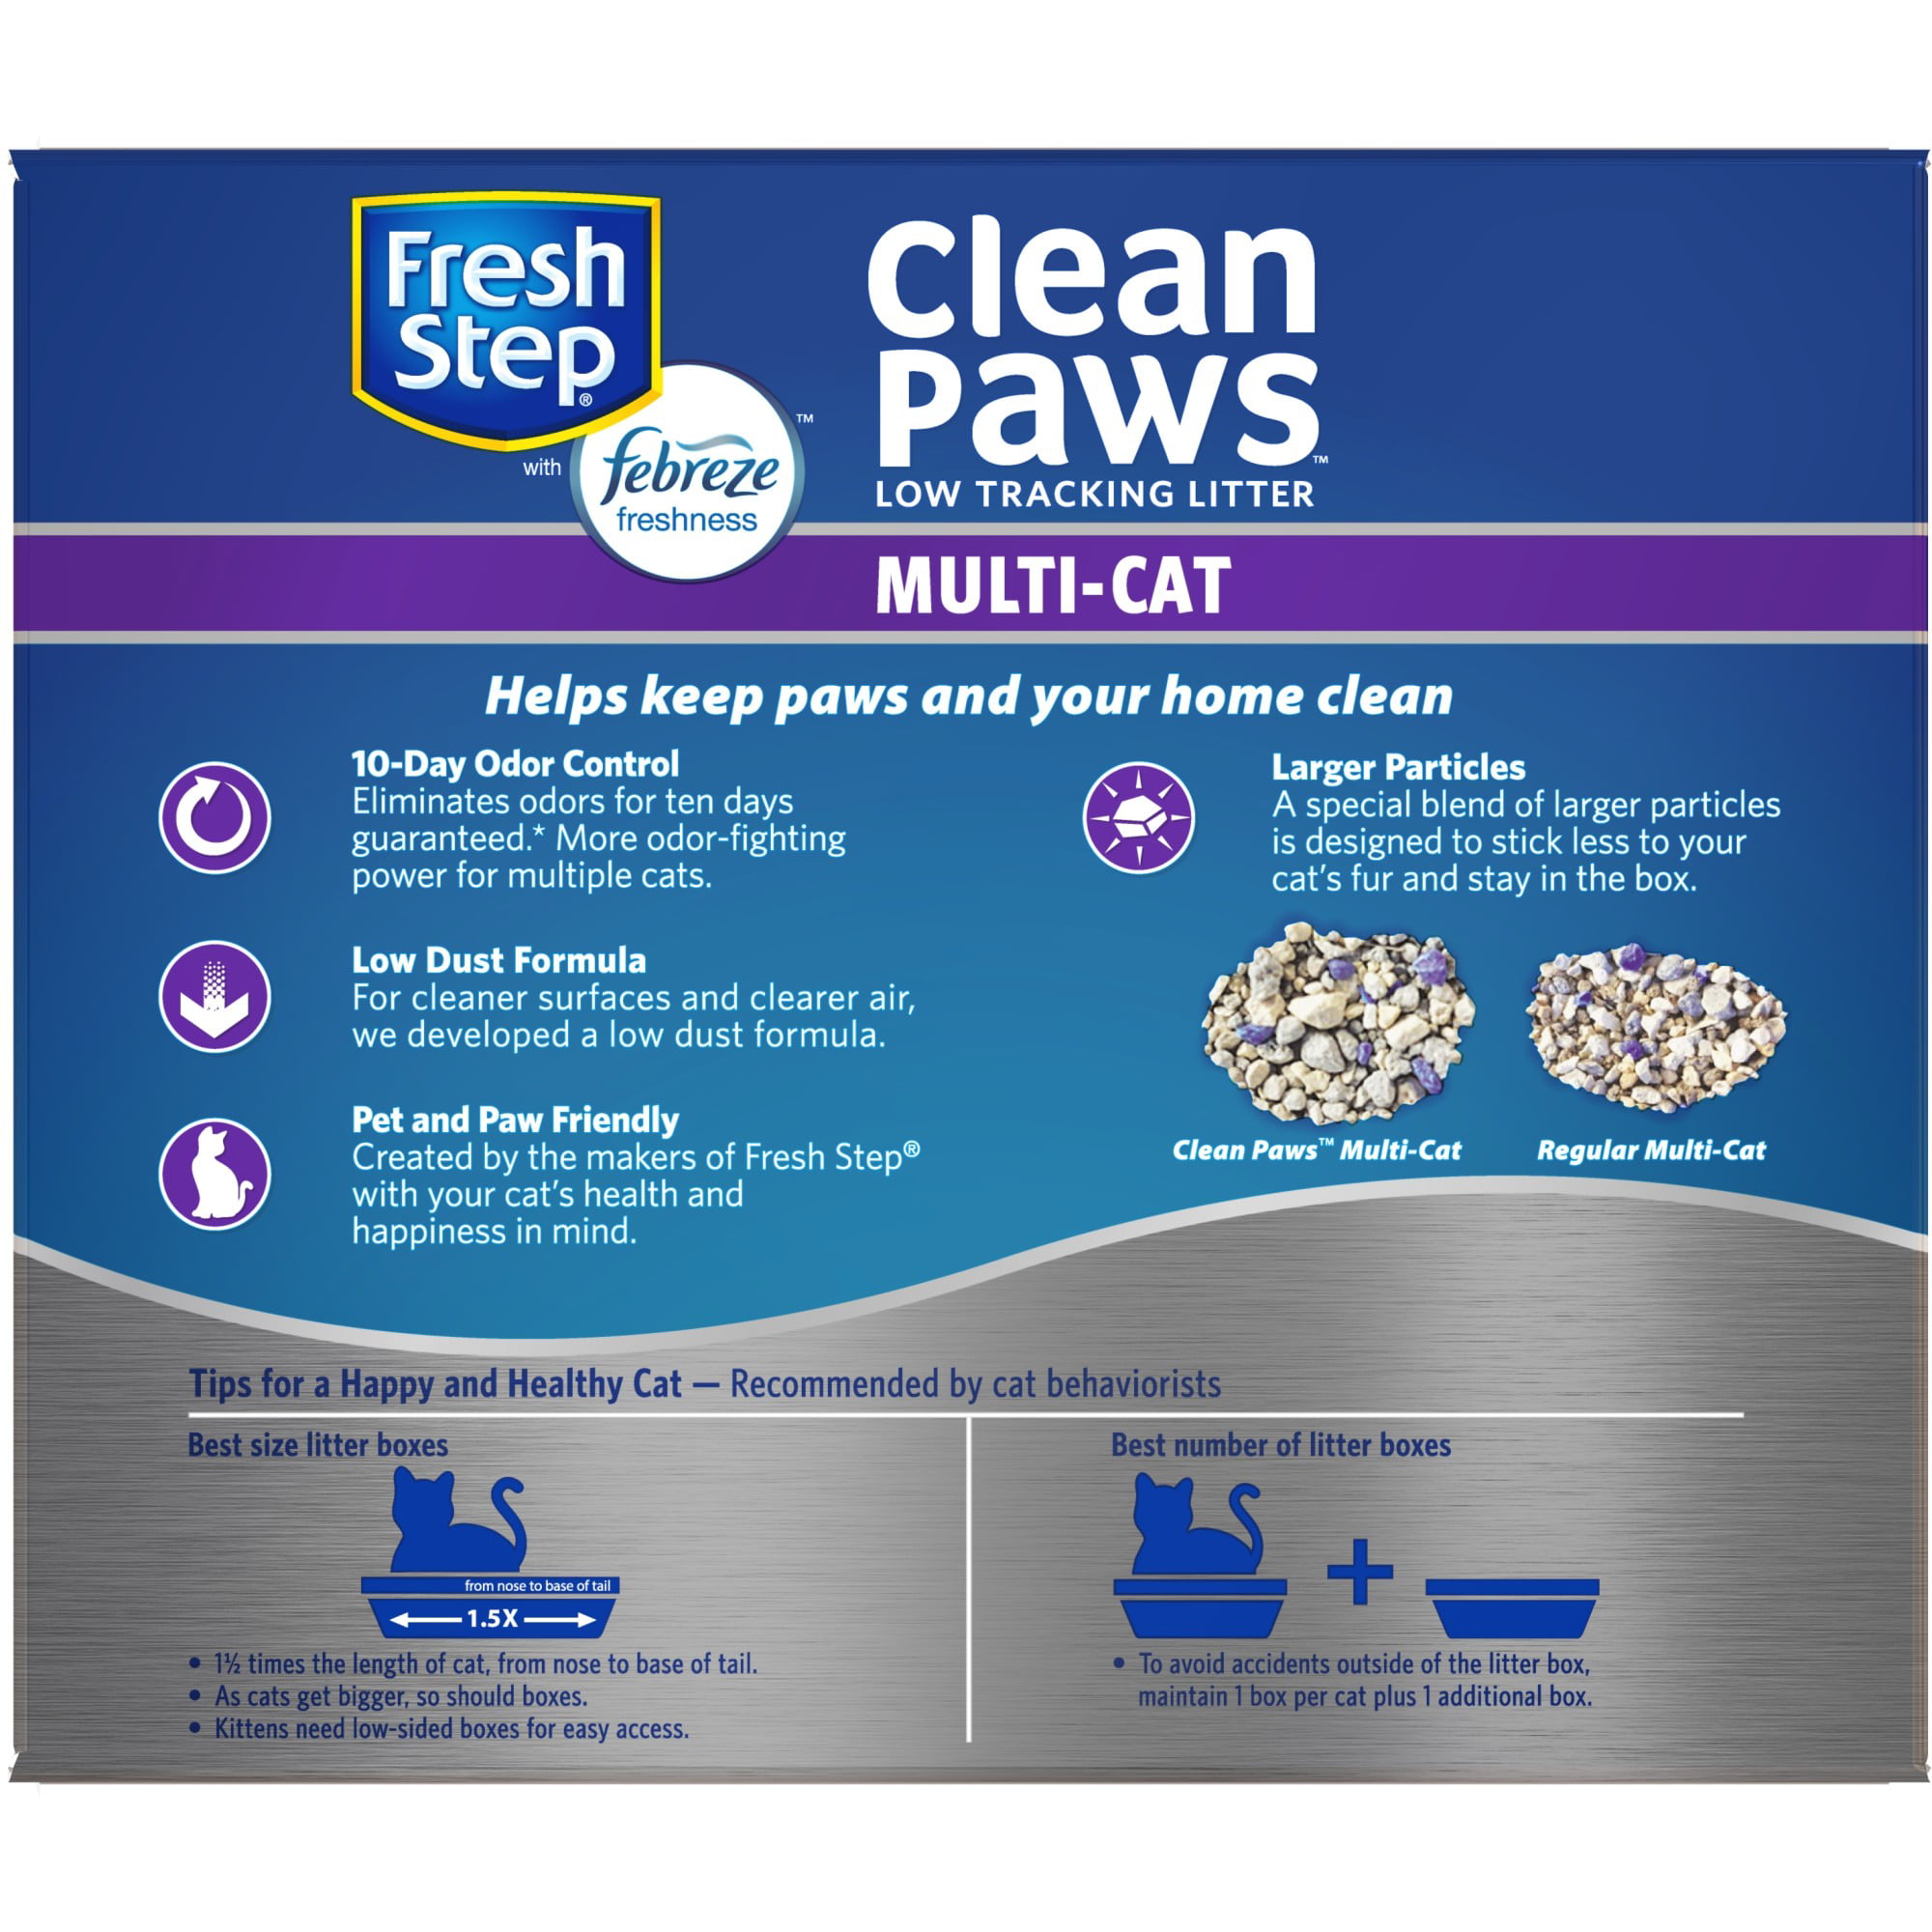 Fresh Step Clean Paws Multi-Cat Scented Litter with Febreze Clumping Cat  Litter, 22.5 lb - Fry's Food Stores